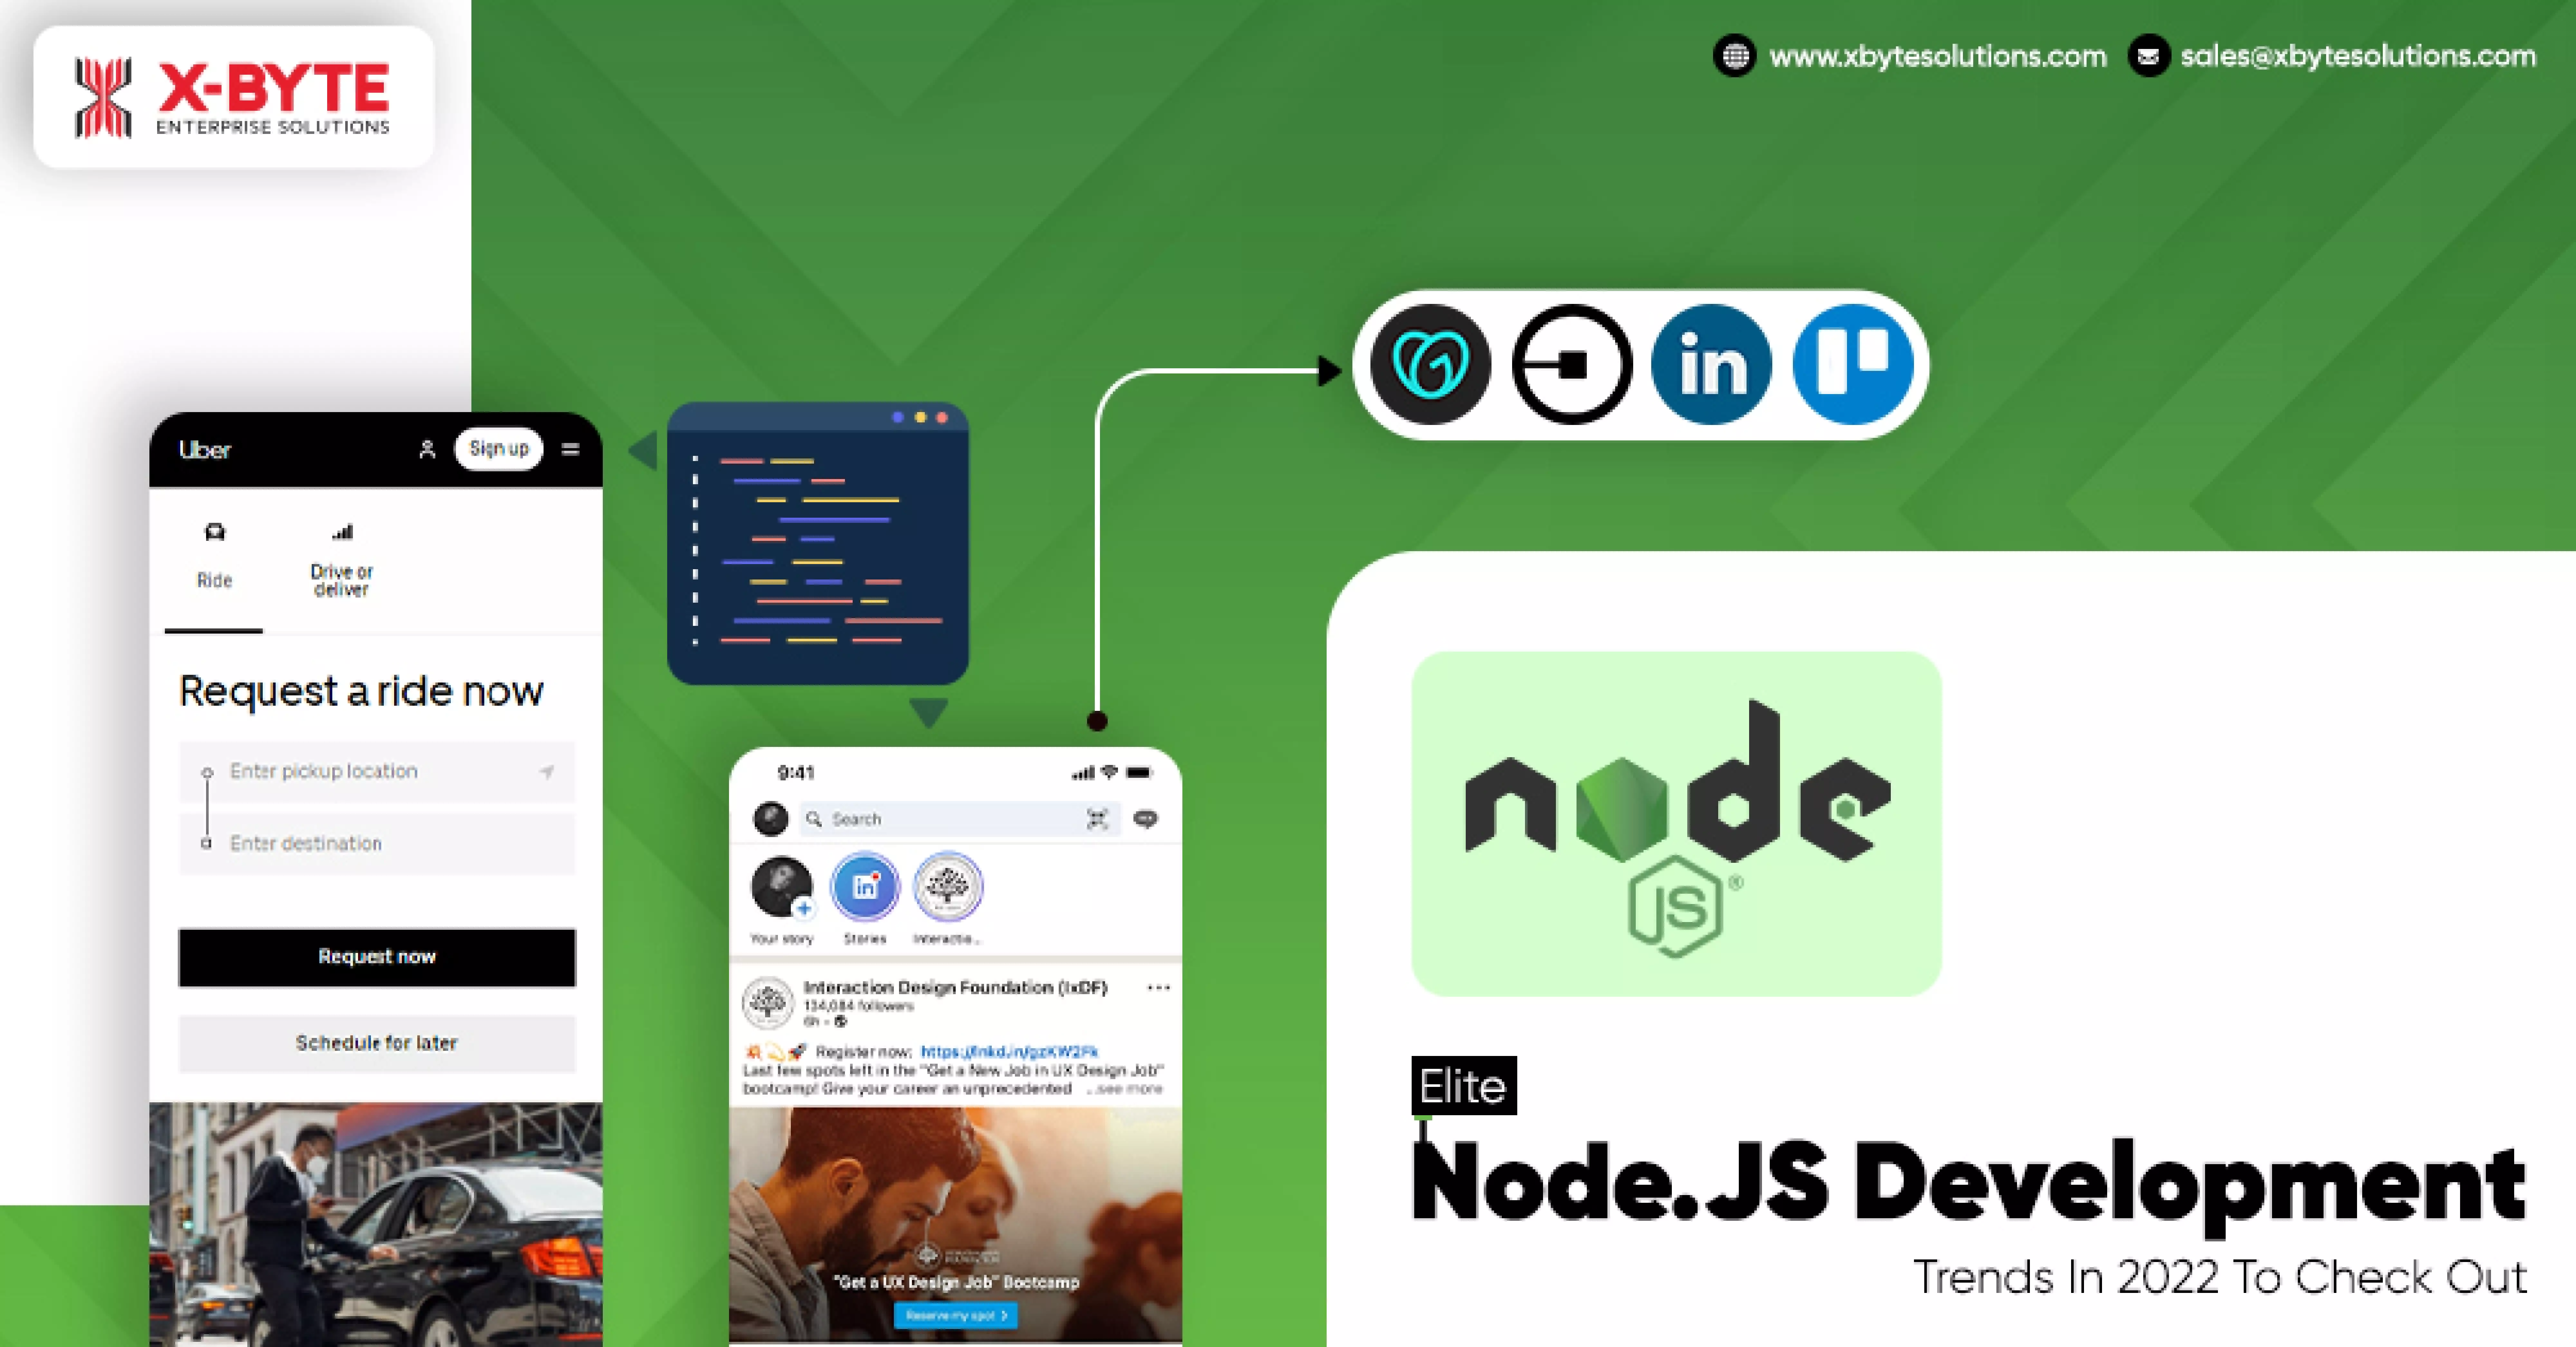 Elite Node.JS Development Trends in 2022 to Check Out